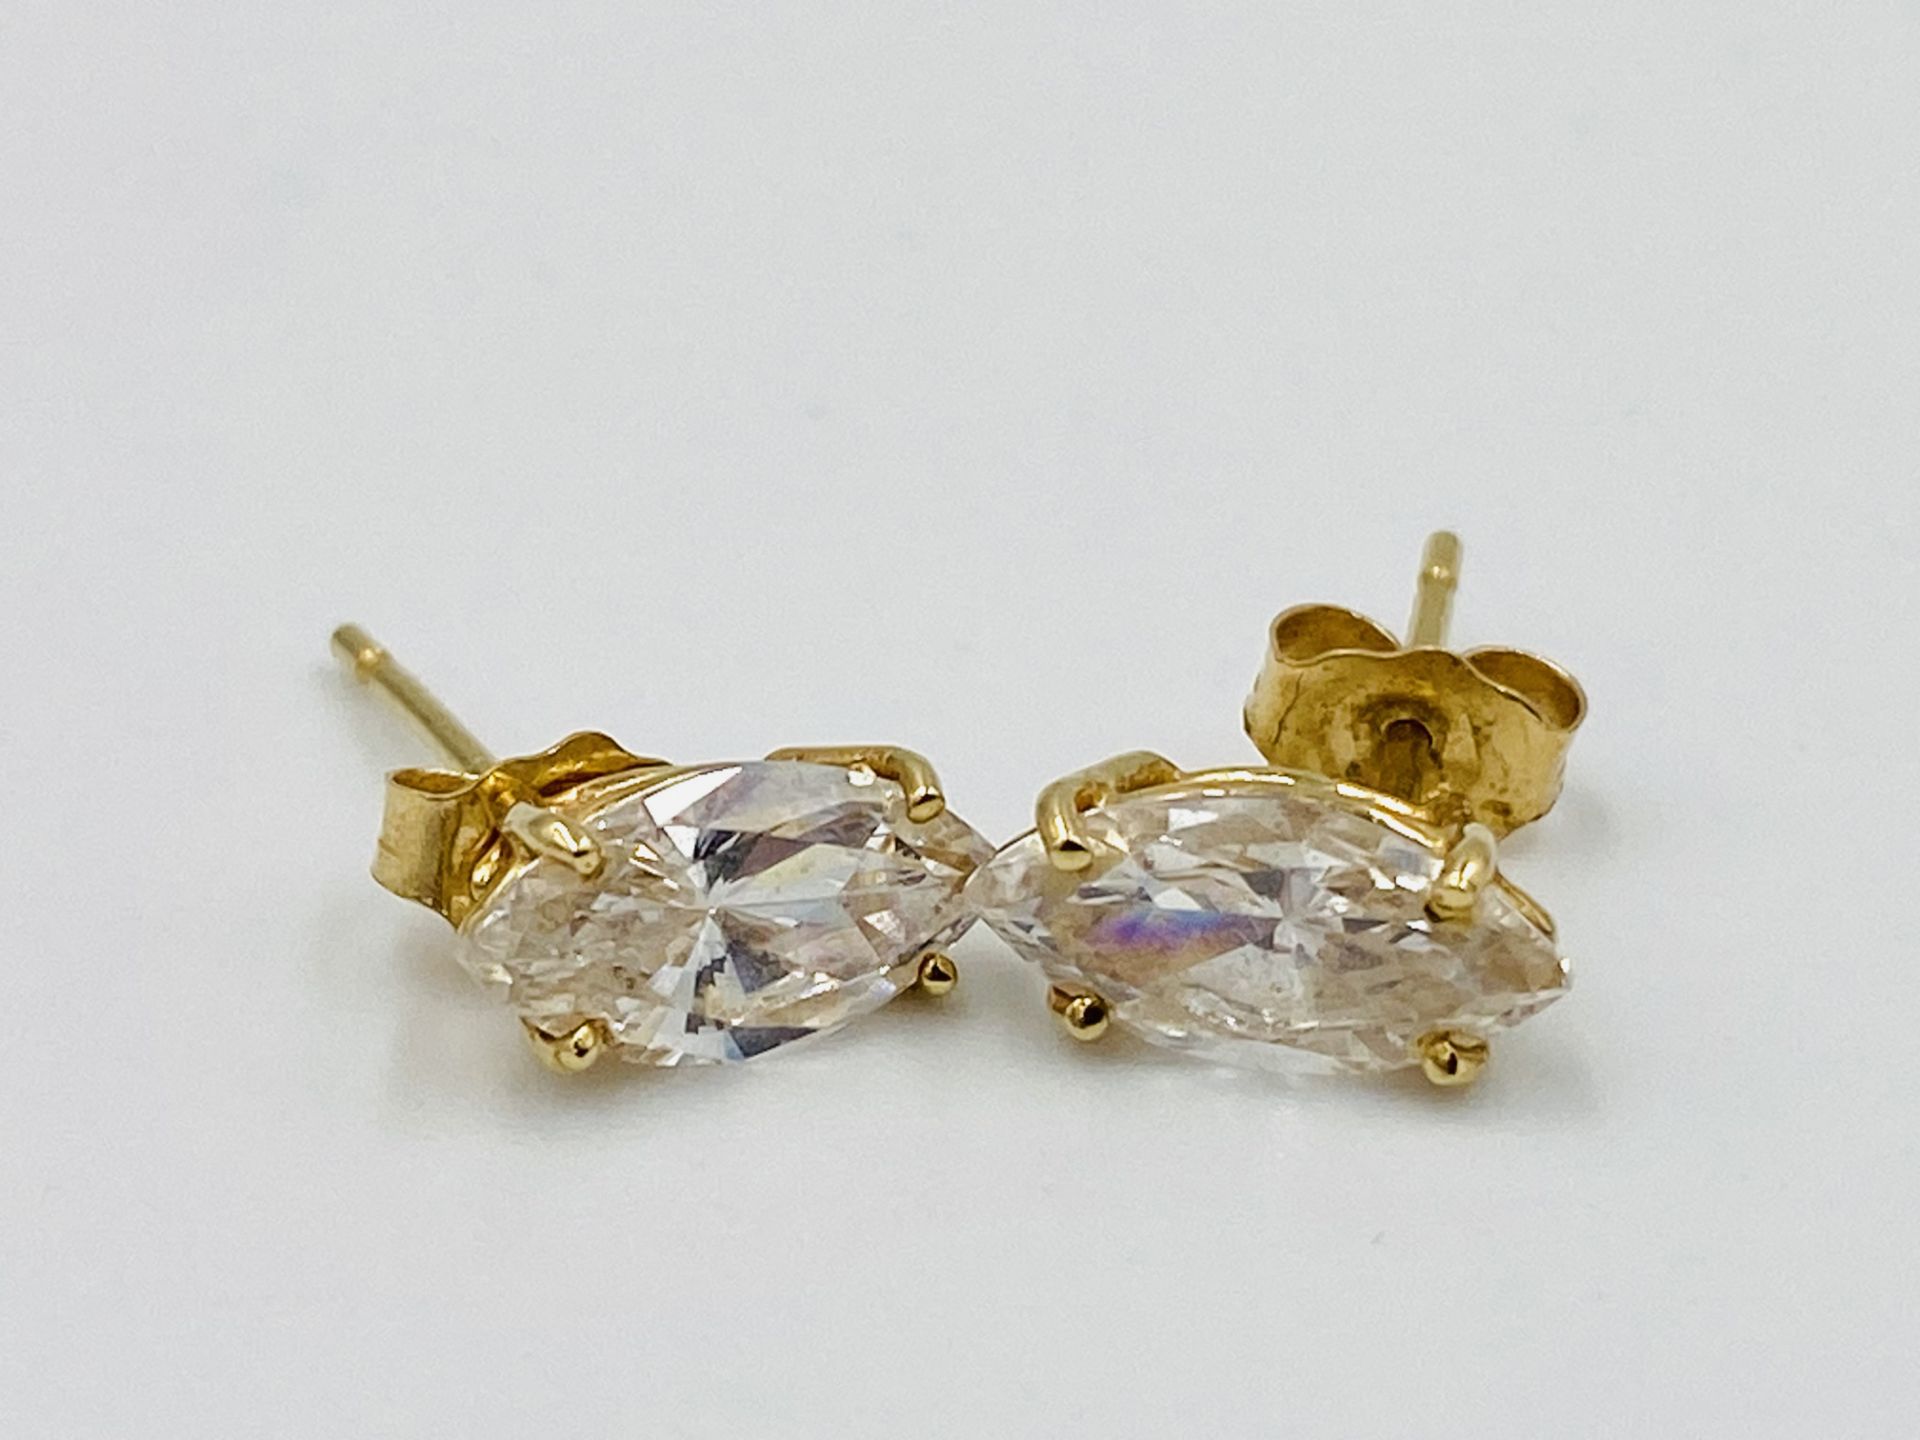 Pair of 14ct gold earrings set with a white stone